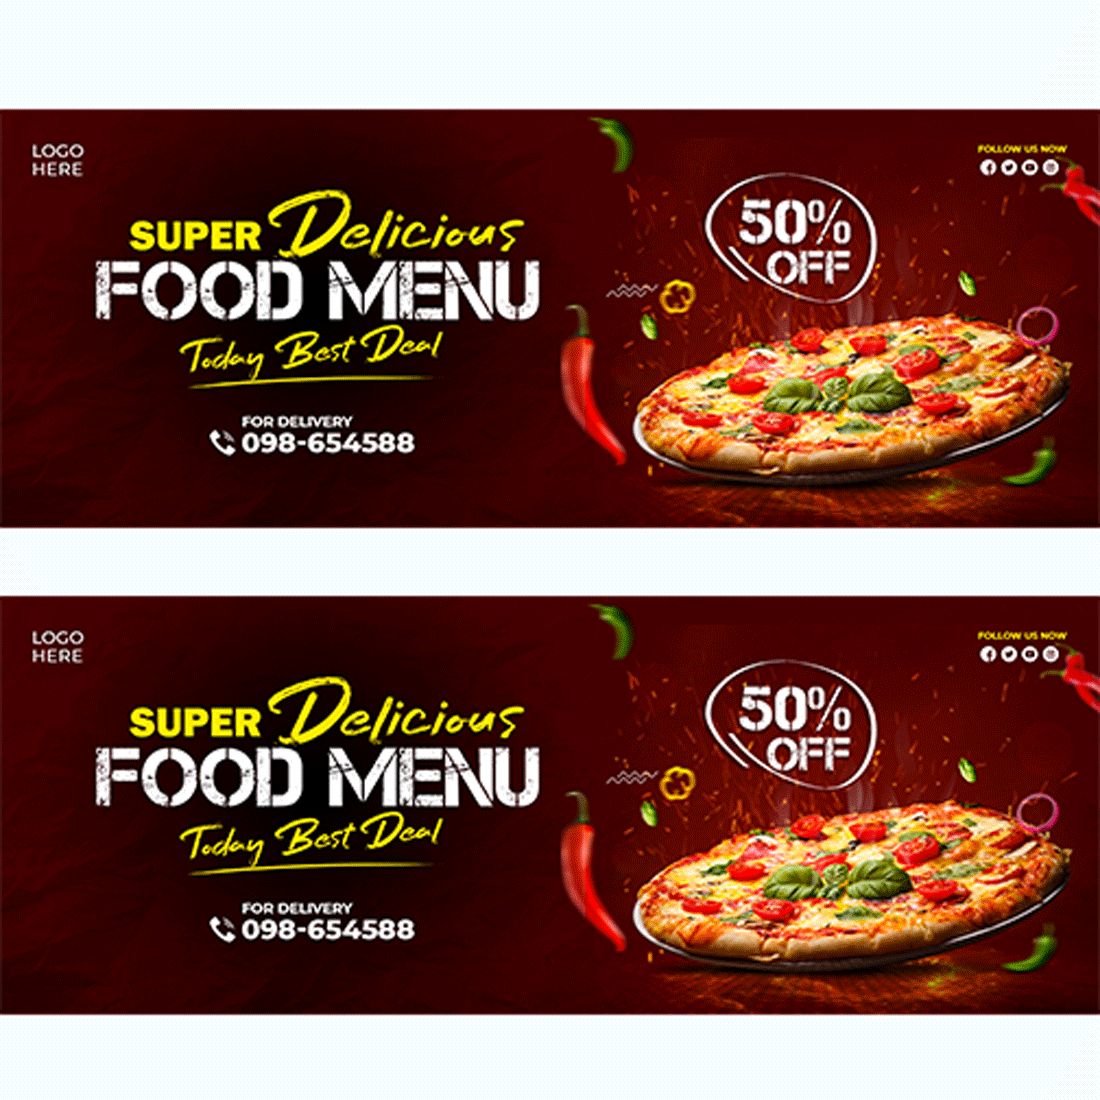 Food menu and restaurant facebook cover template preview image.